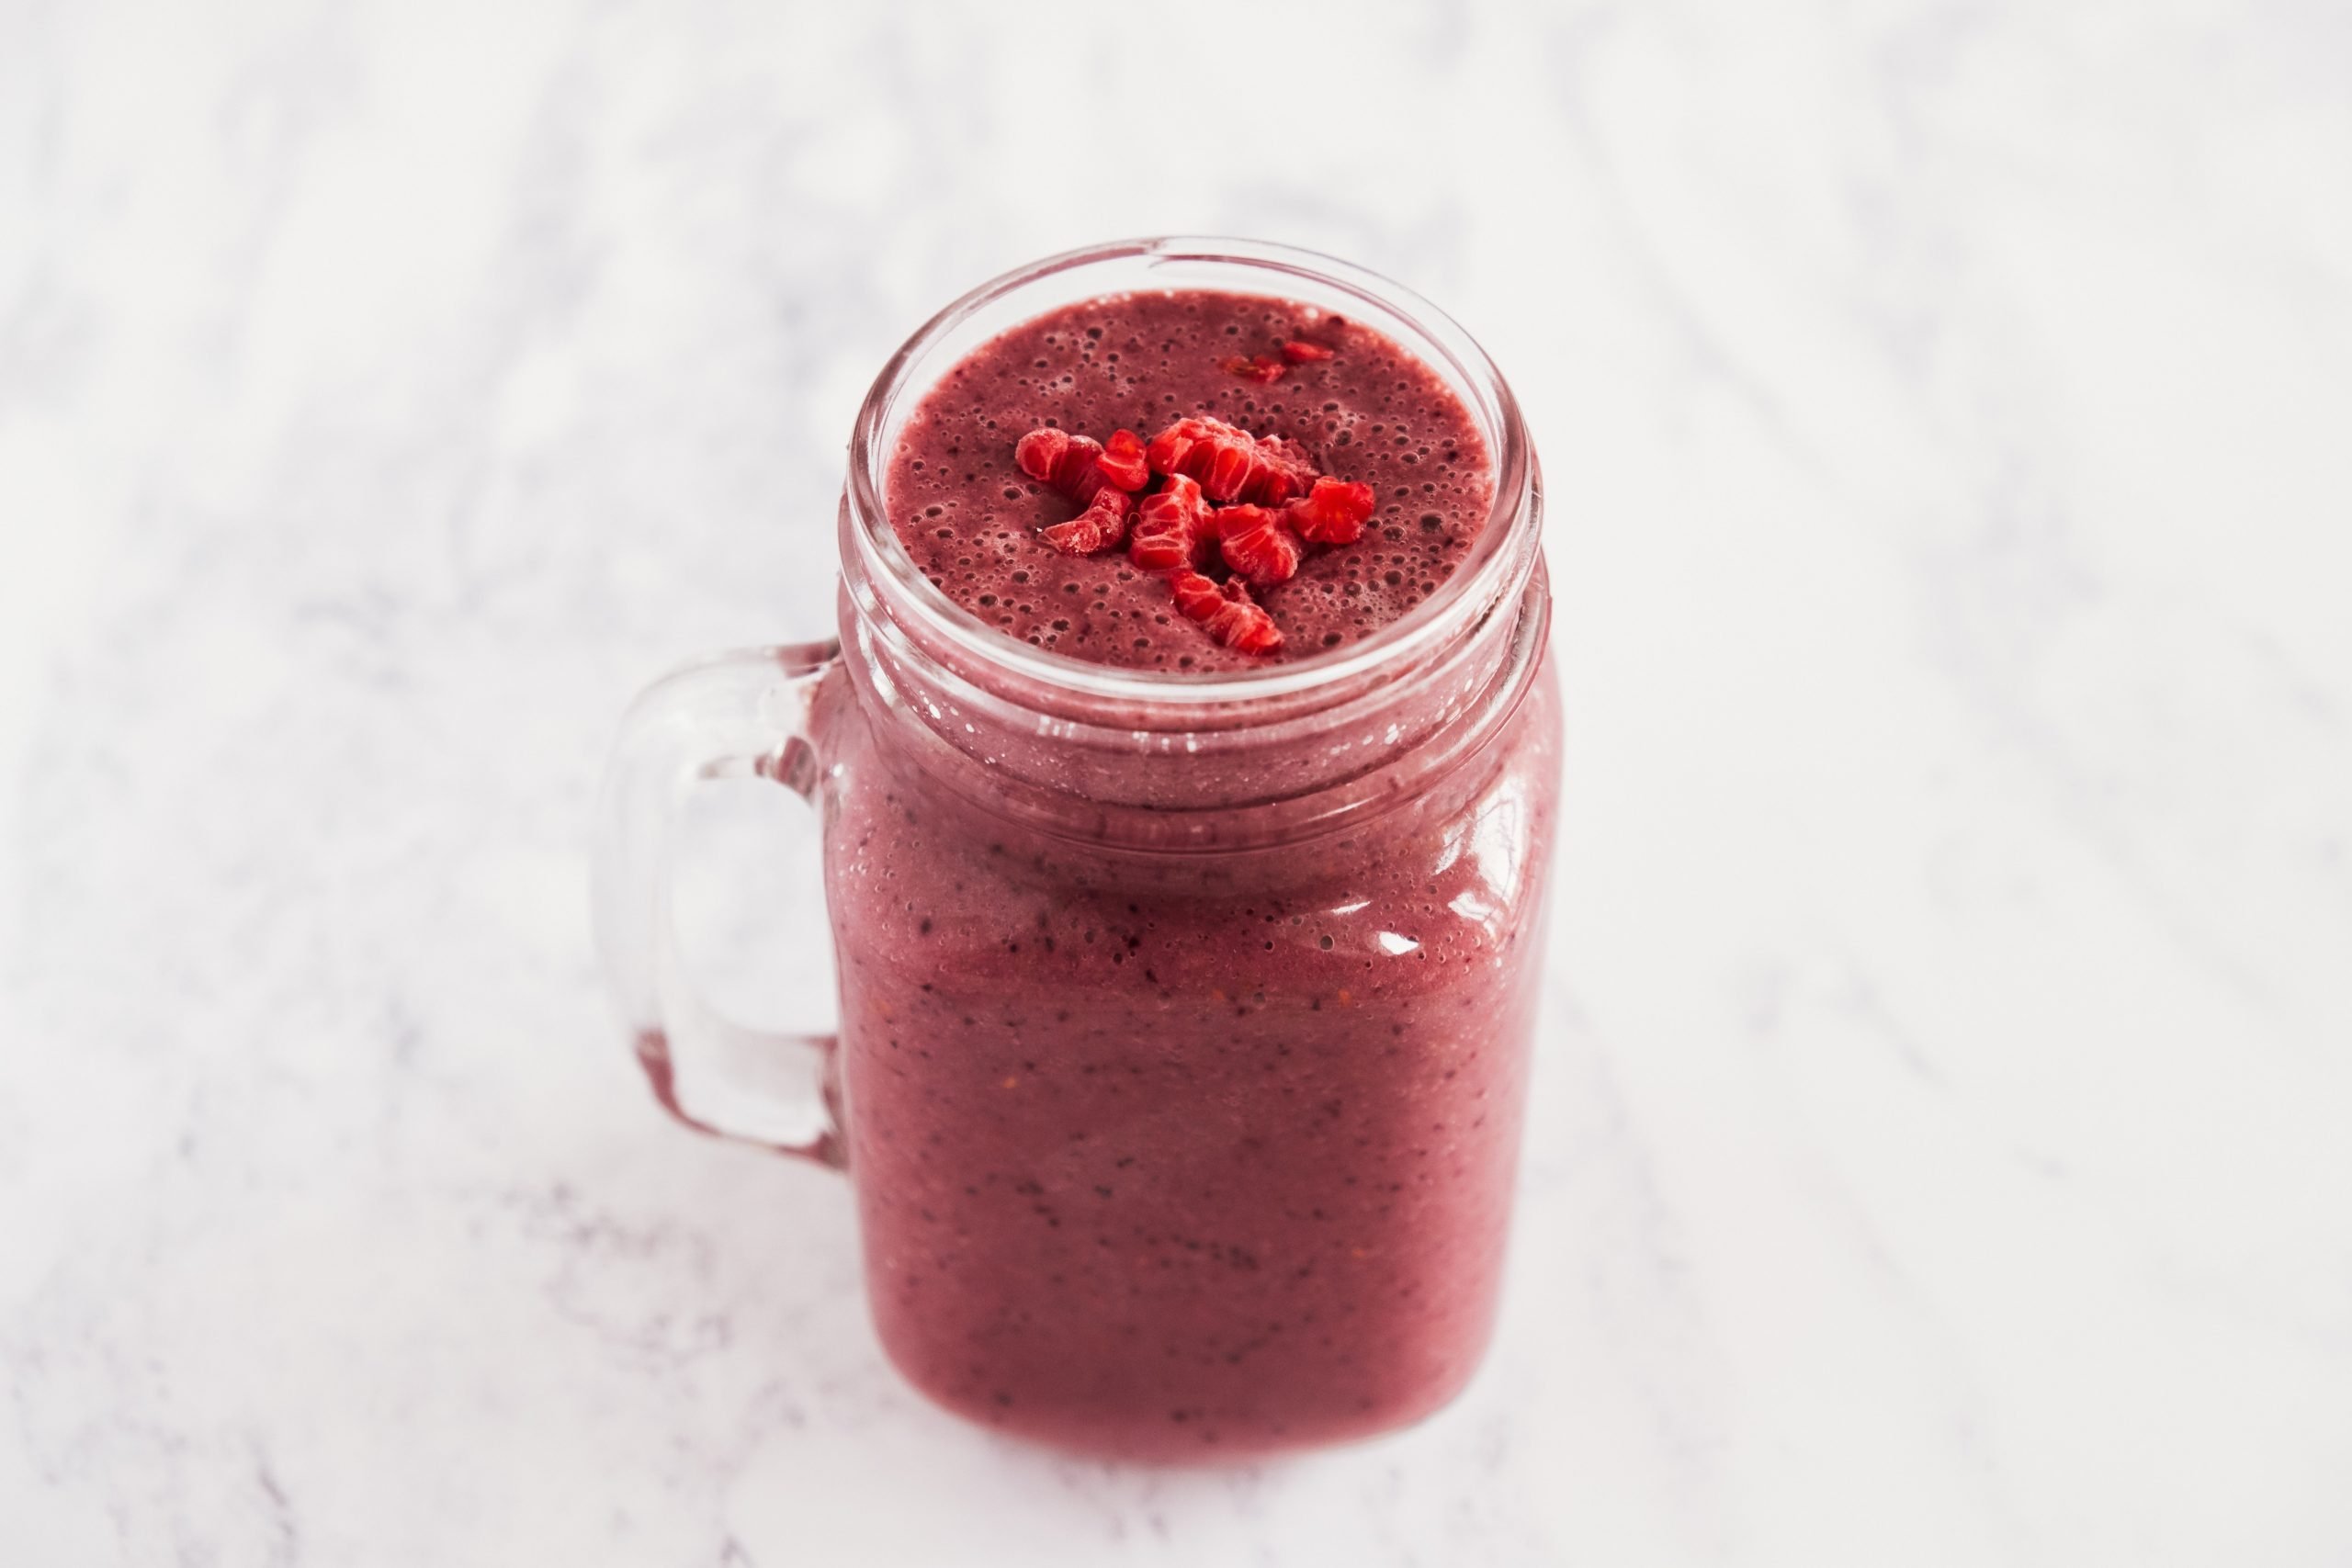 An Immune Boosting Fruit Smoothie